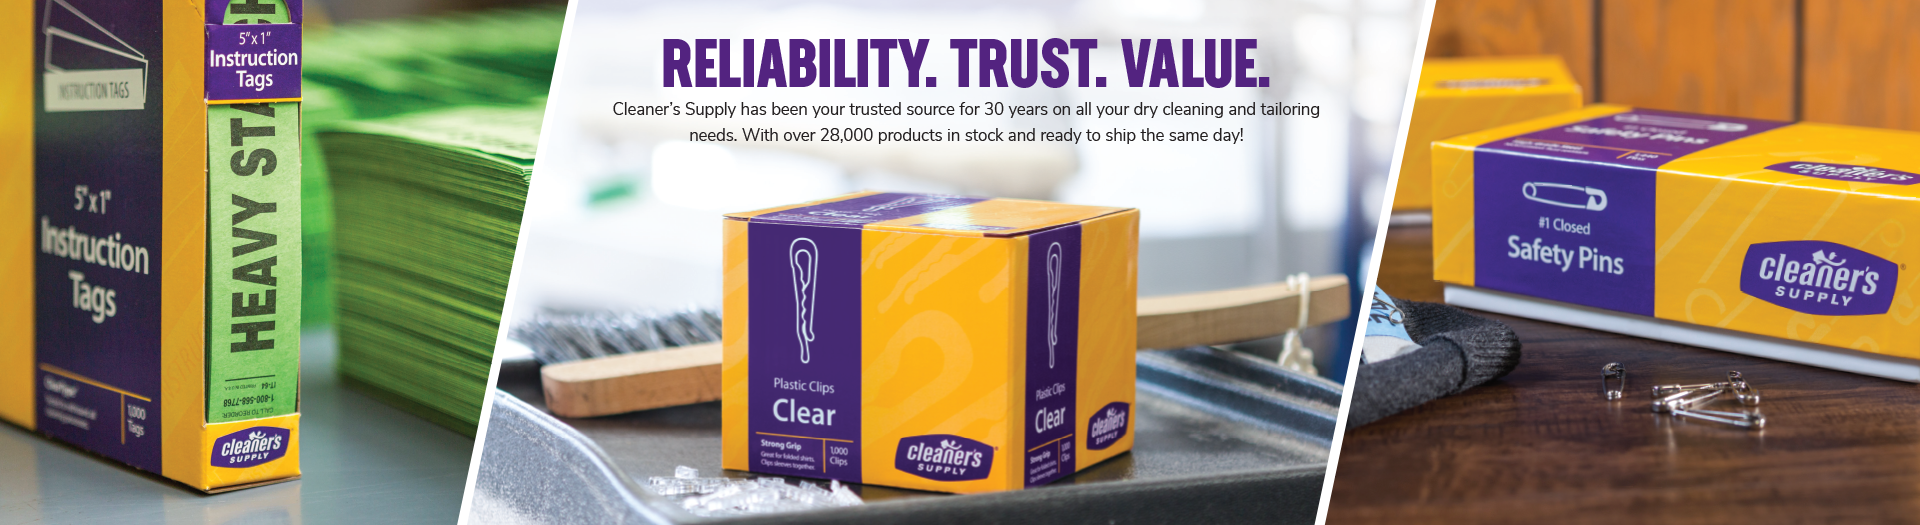 Reliabilit. Trust. Value. Cleaner's Suply has been your trusted source for 30 years on all your dry cleaning and tailoring needs. With over 28,000 products in stock and ready to ship the same day!